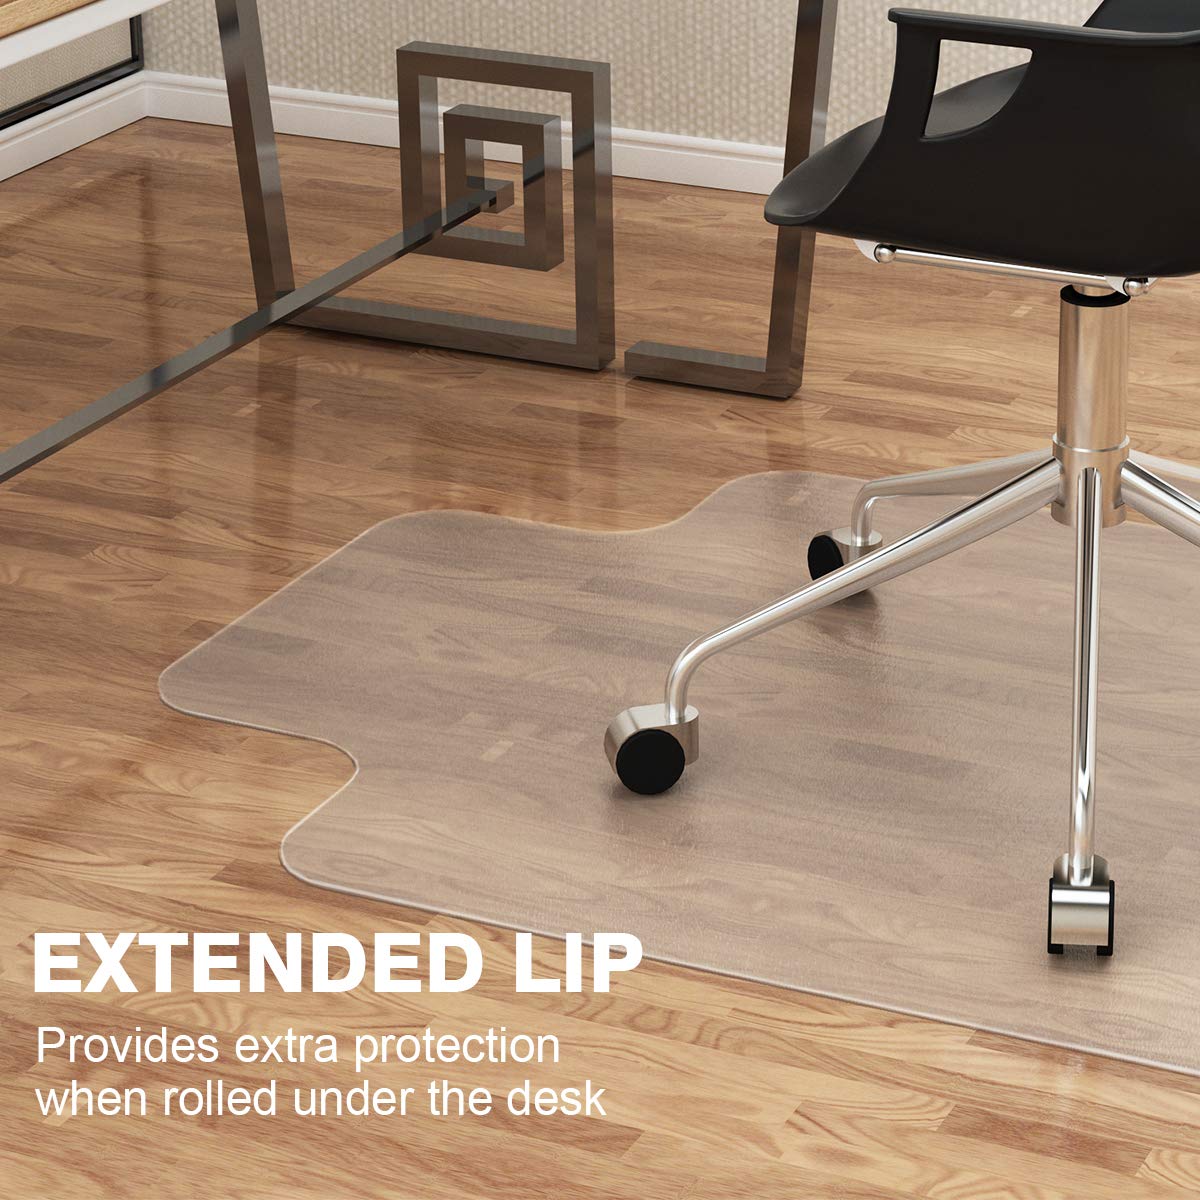 Winado Office Chair Mat For Hardwood, What Do You Put Under Office Chair On Hardwood Floors